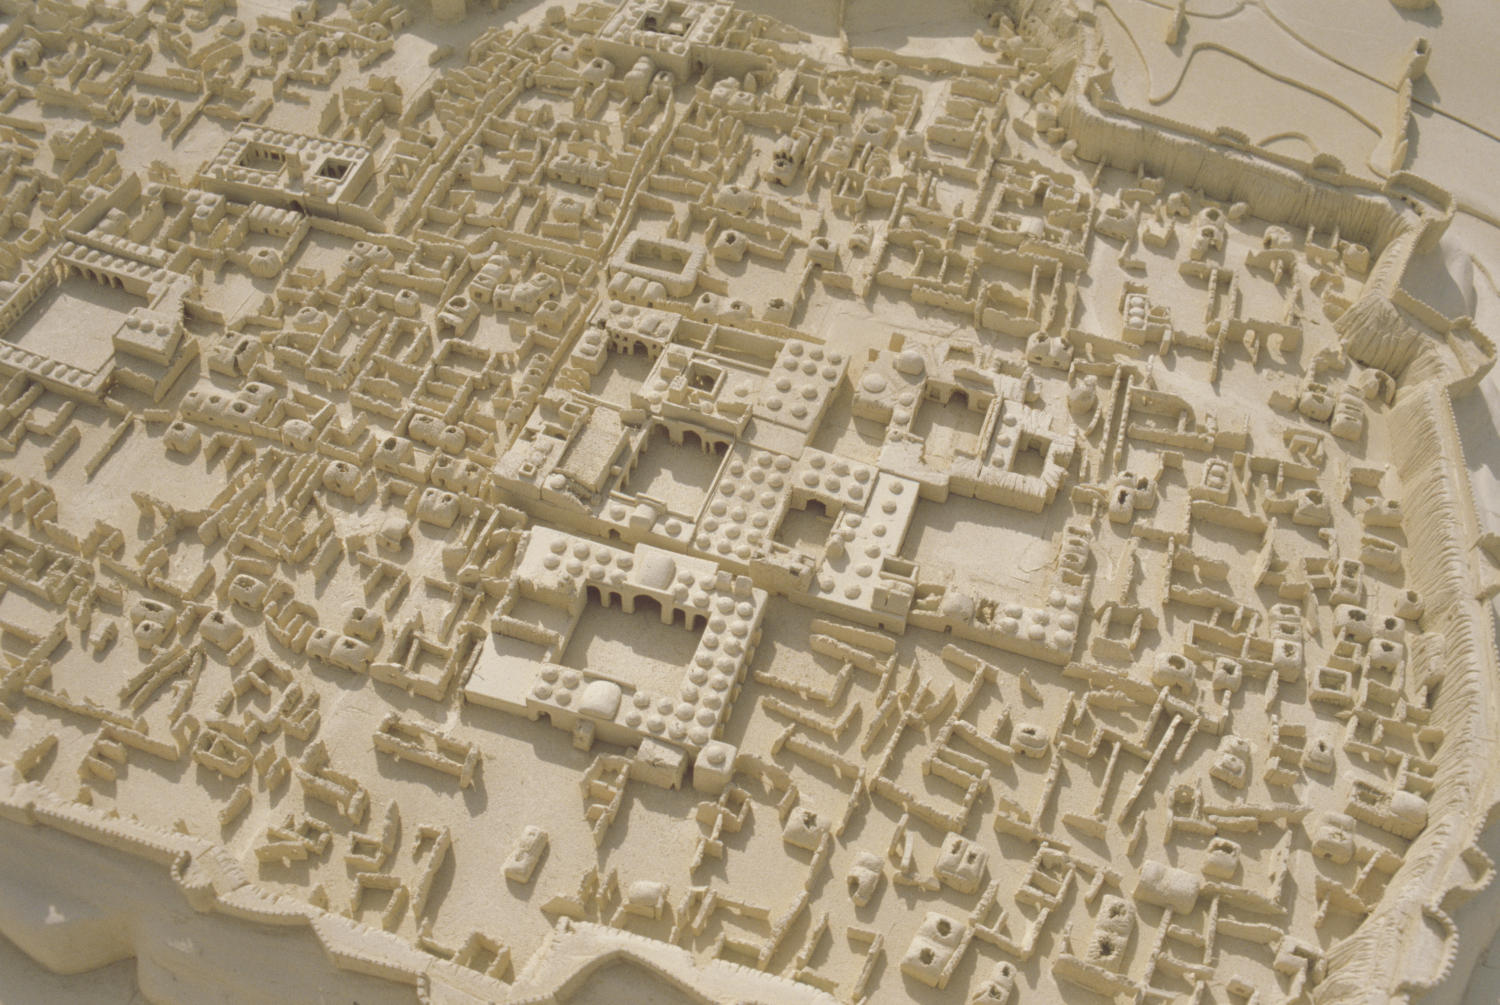 View of a site model.